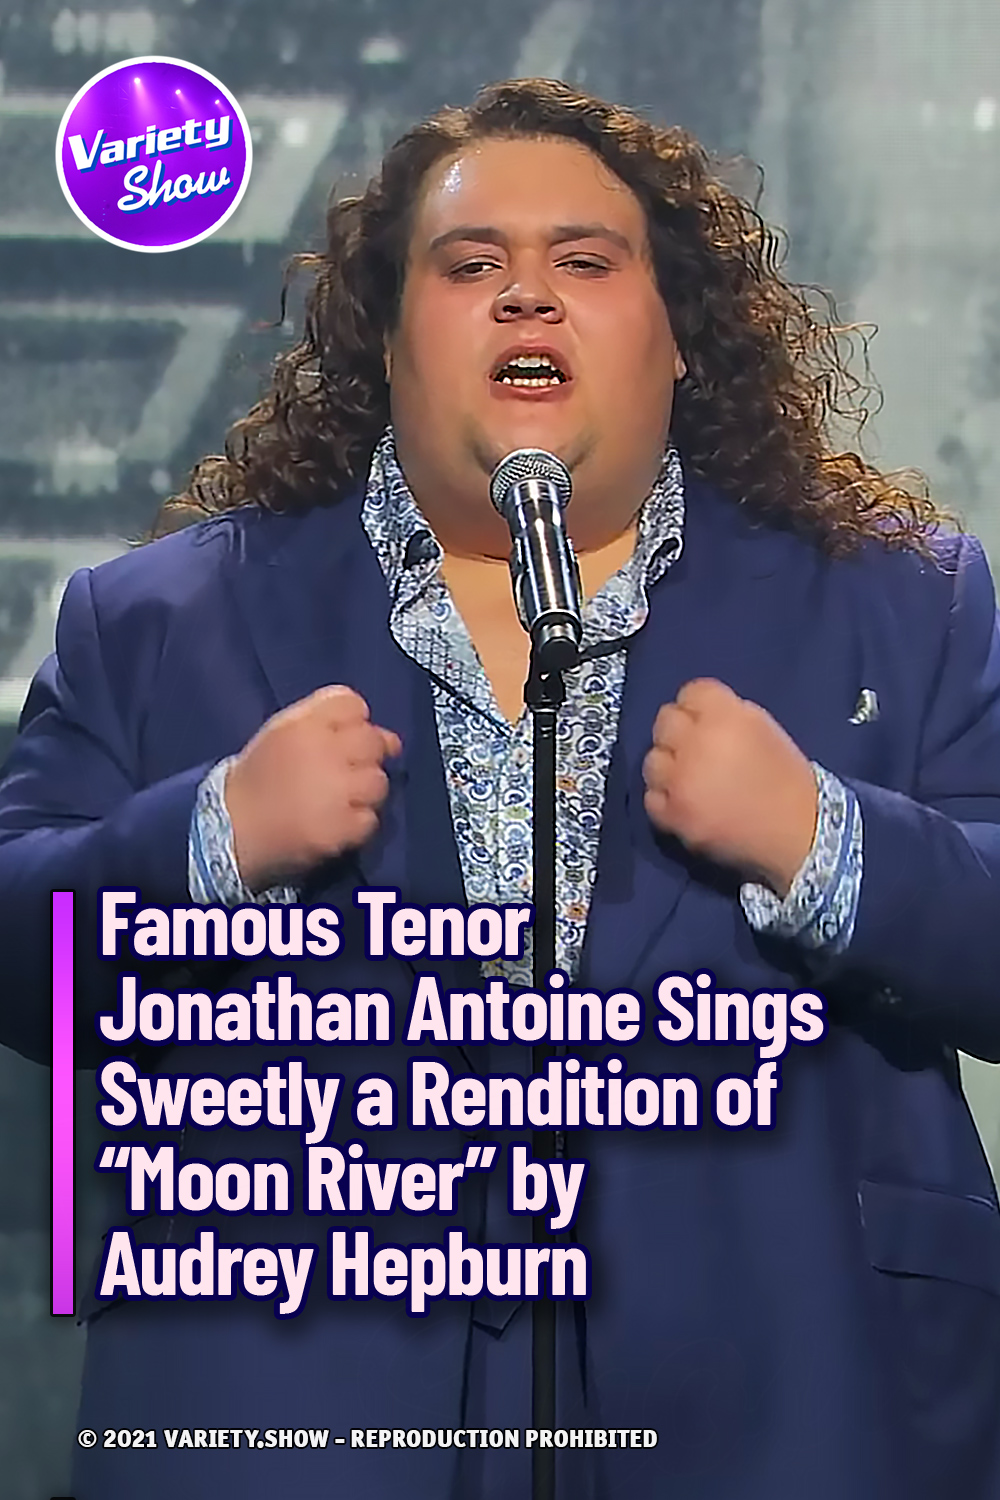 Famous Tenor Jonathan Antoine Sings Sweetly a Rendition of “Moon River” by Audrey Hepburn